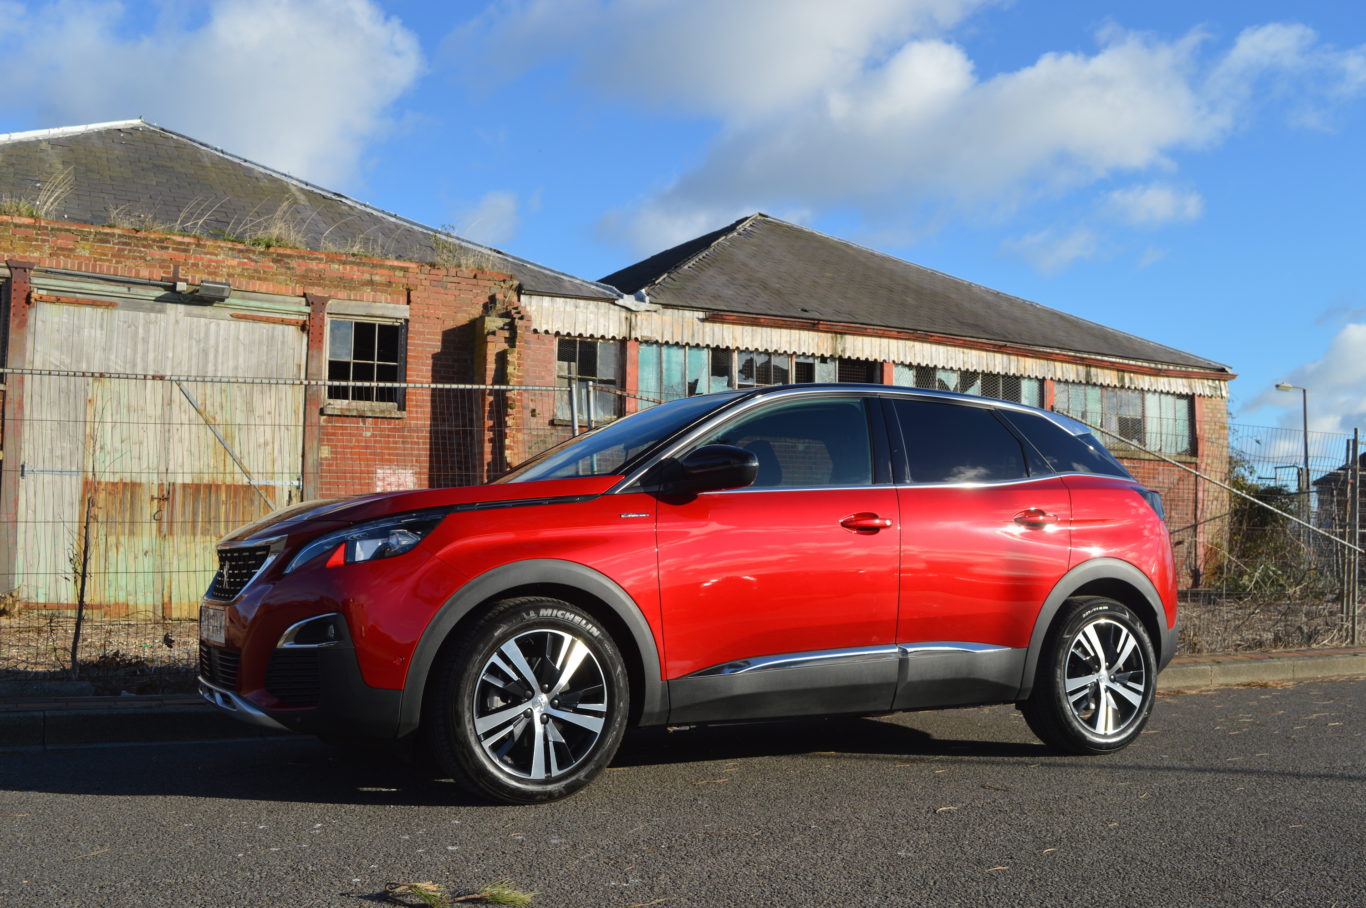 The Peugeot benefits from large diamond-cut alloy wheels